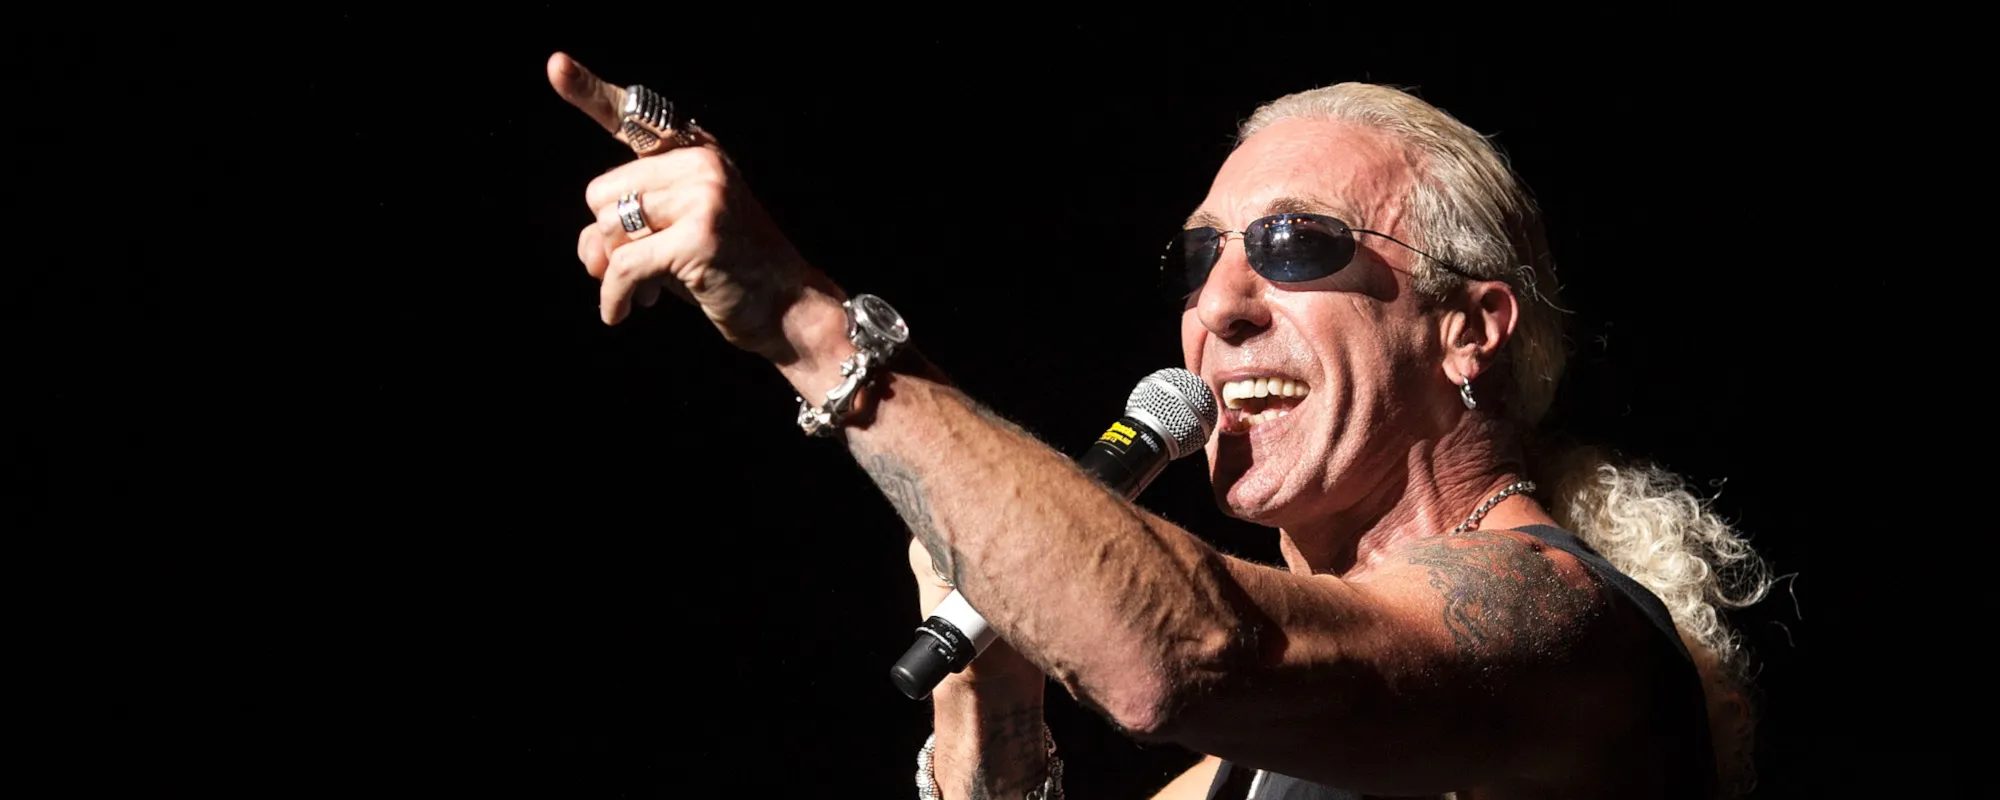 Dee Snider Receives Backlash for Ukraine Invasion Comments, Approves of Twisted Sister Hit “We’re Not Gonna Take It” as Battle Cry